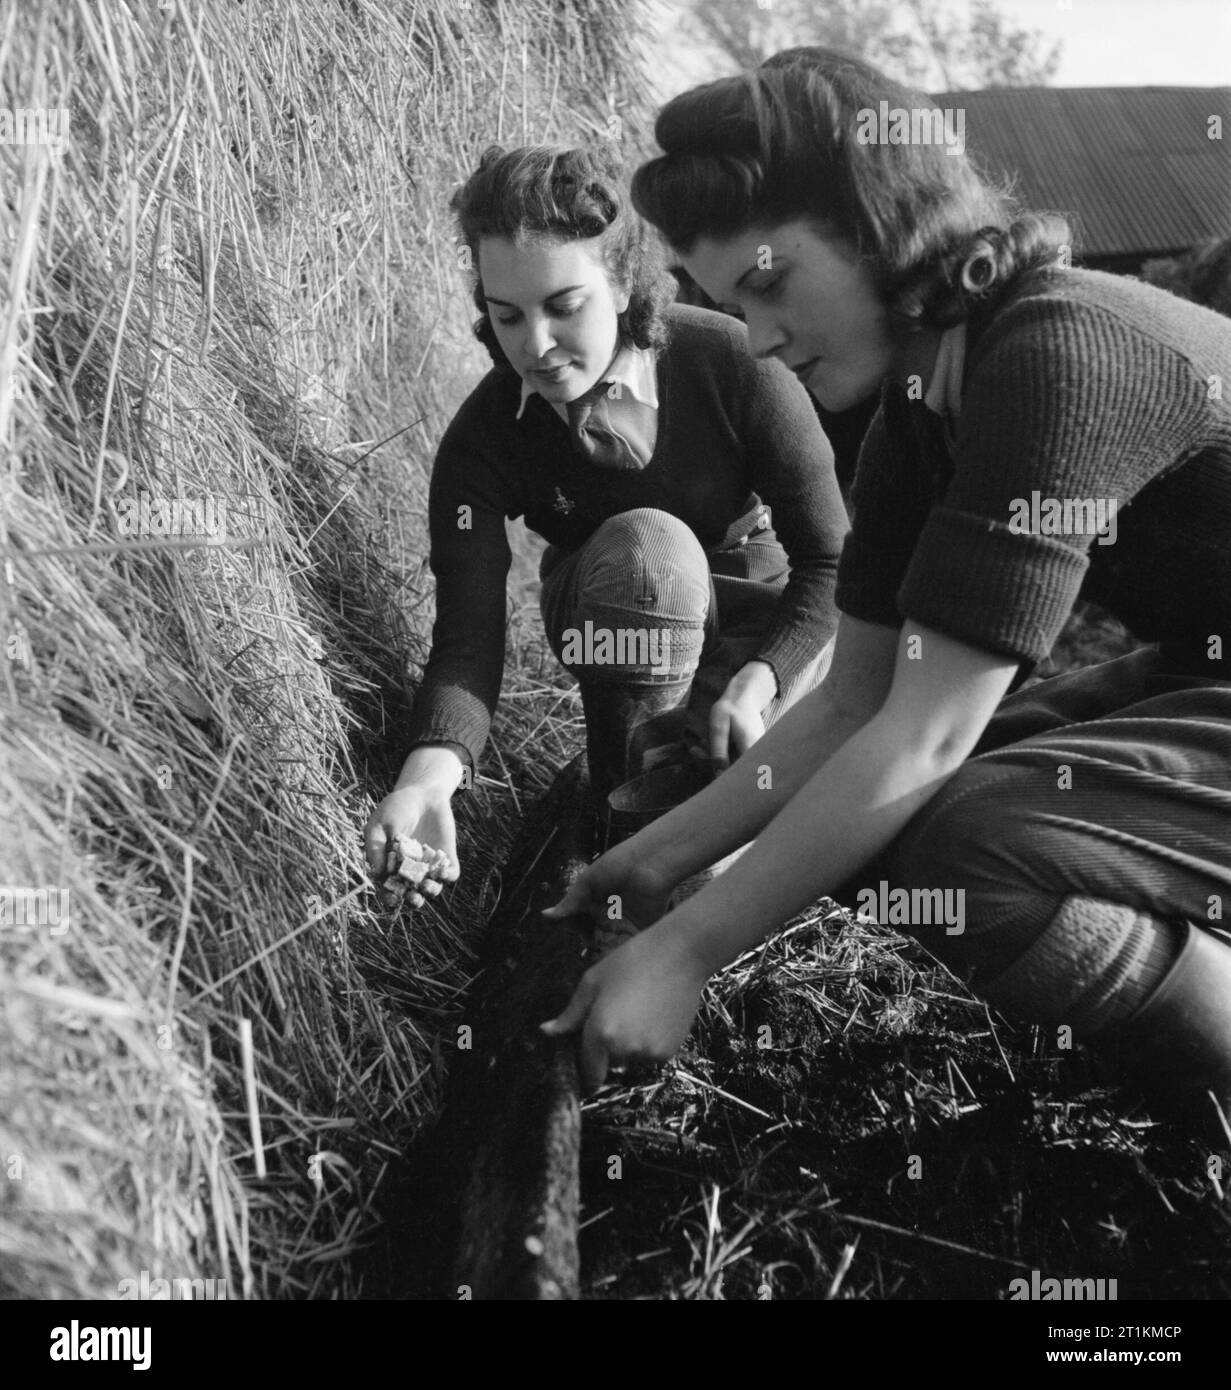 https://c8.alamy.com/comp/2T1KMCP/land-girls-audrey-prickett-and-betty-long-set-a-rat-trap-in-a-hay-stack-as-part-of-their-training-on-a-sussex-farm-during-1942-2T1KMCP.jpg